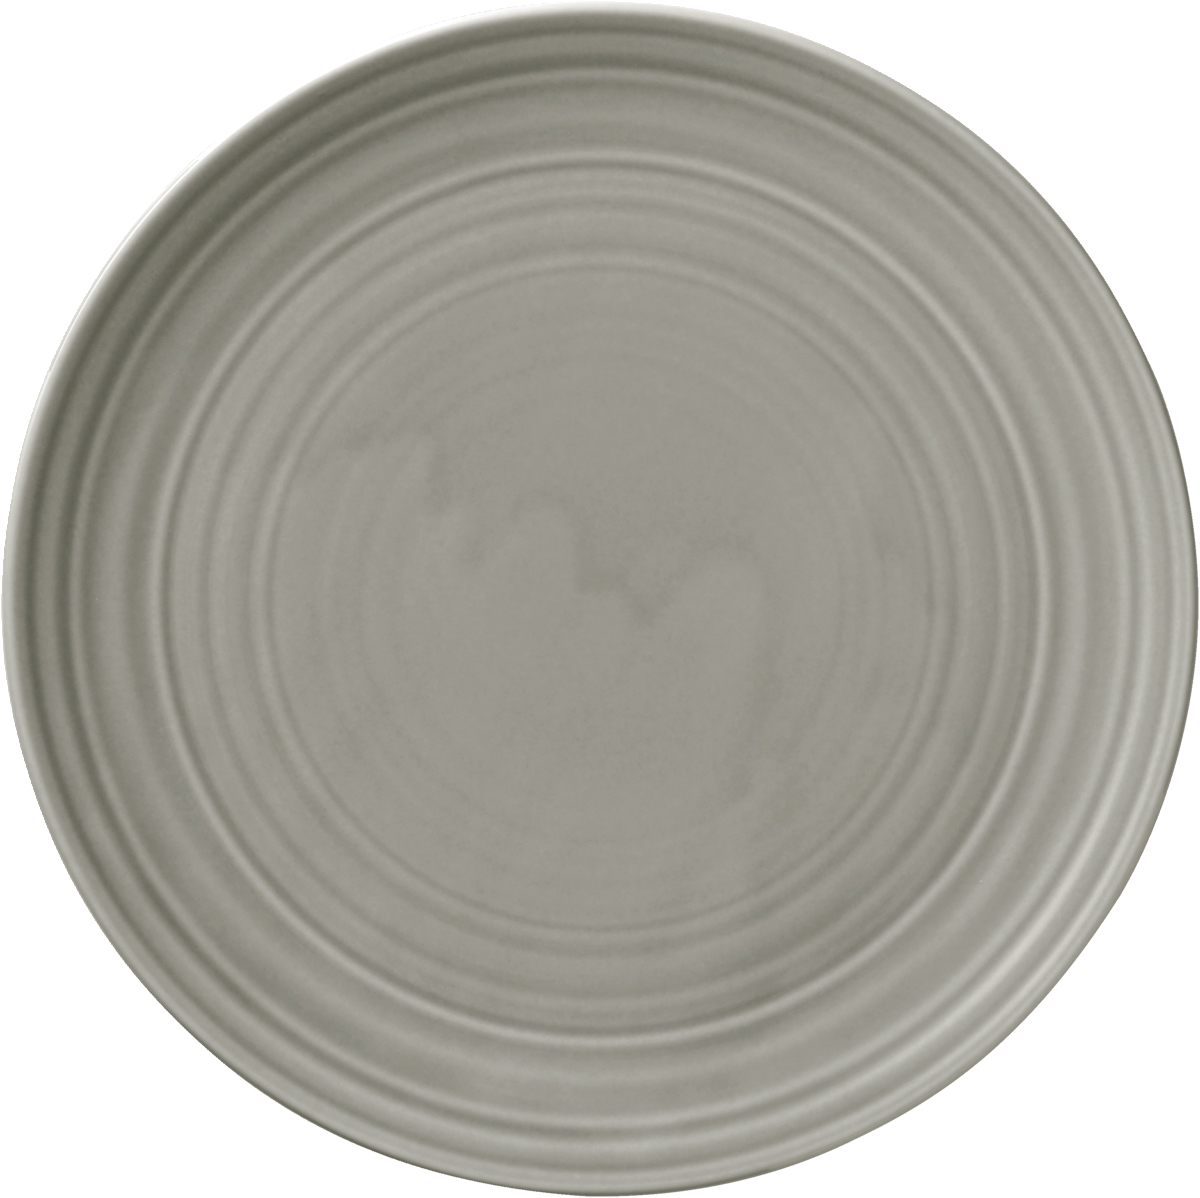 Teller flach rund coup 26cm COUNTRY HOUSE GRAY